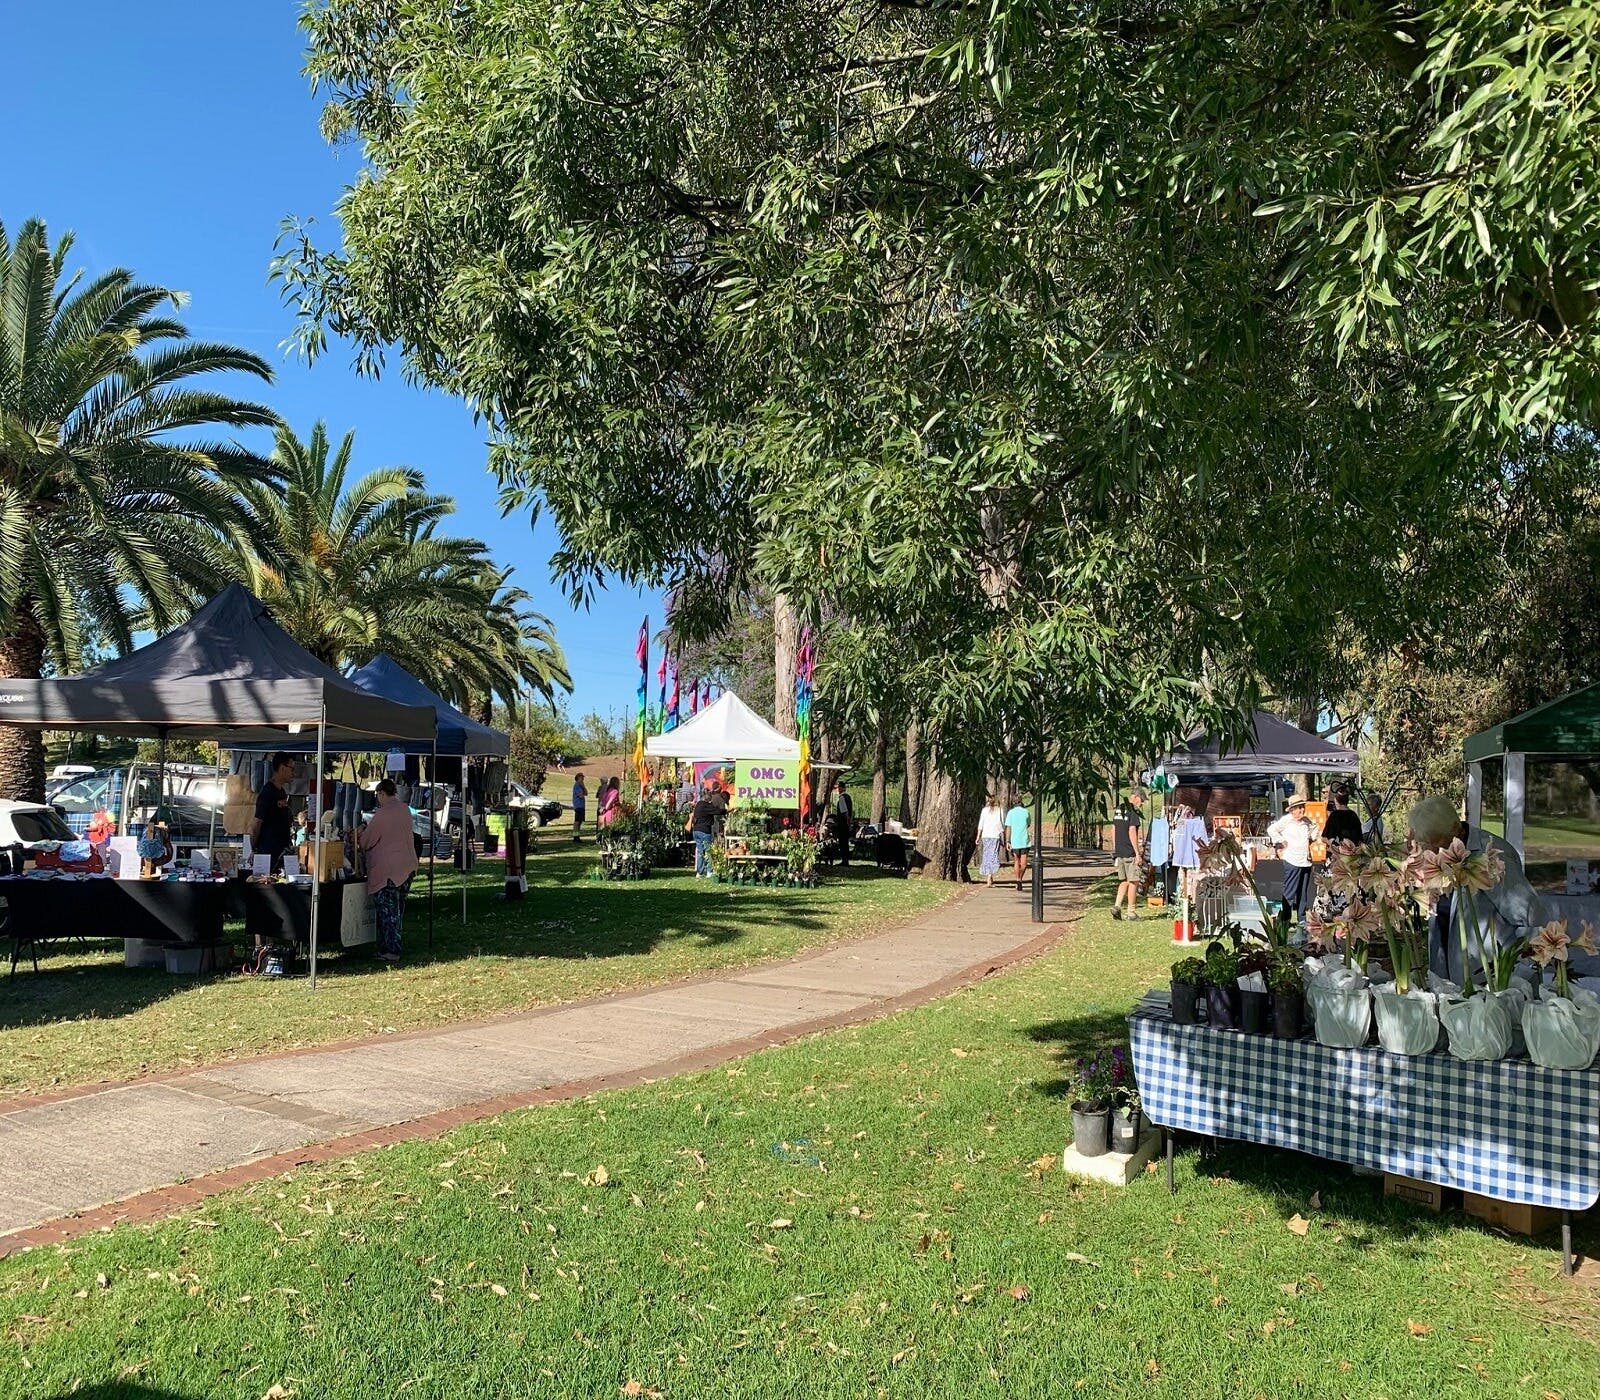 Photograph of multiple stalls in Bicentennial Park